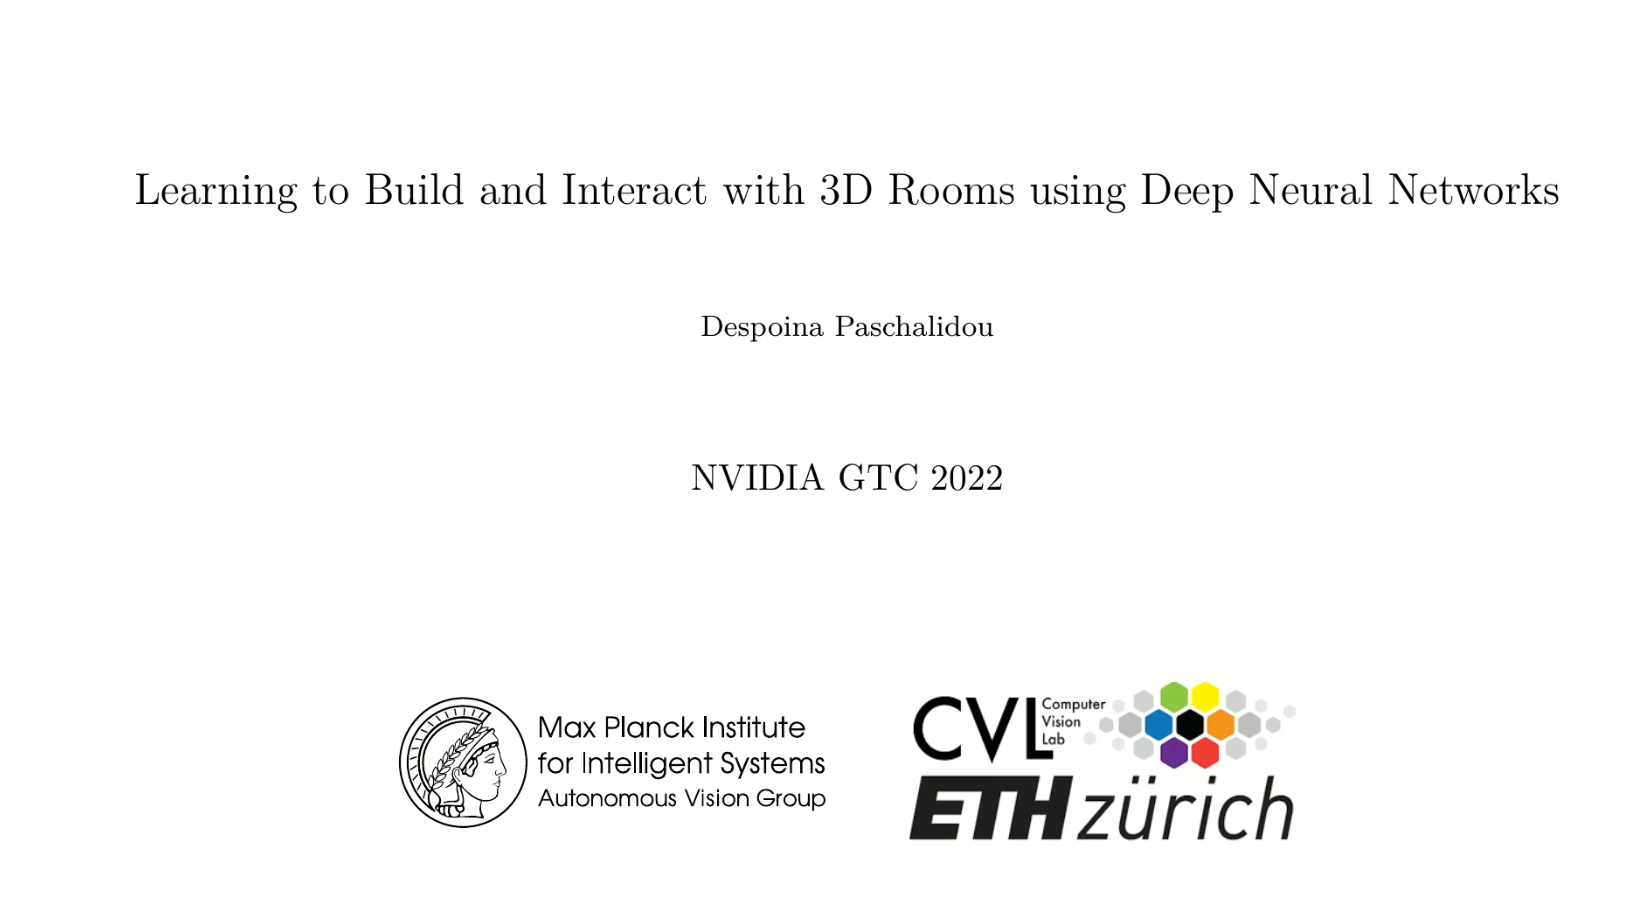 Learning to Build and Interact with 3D Rooms Using Deep Neural Networks